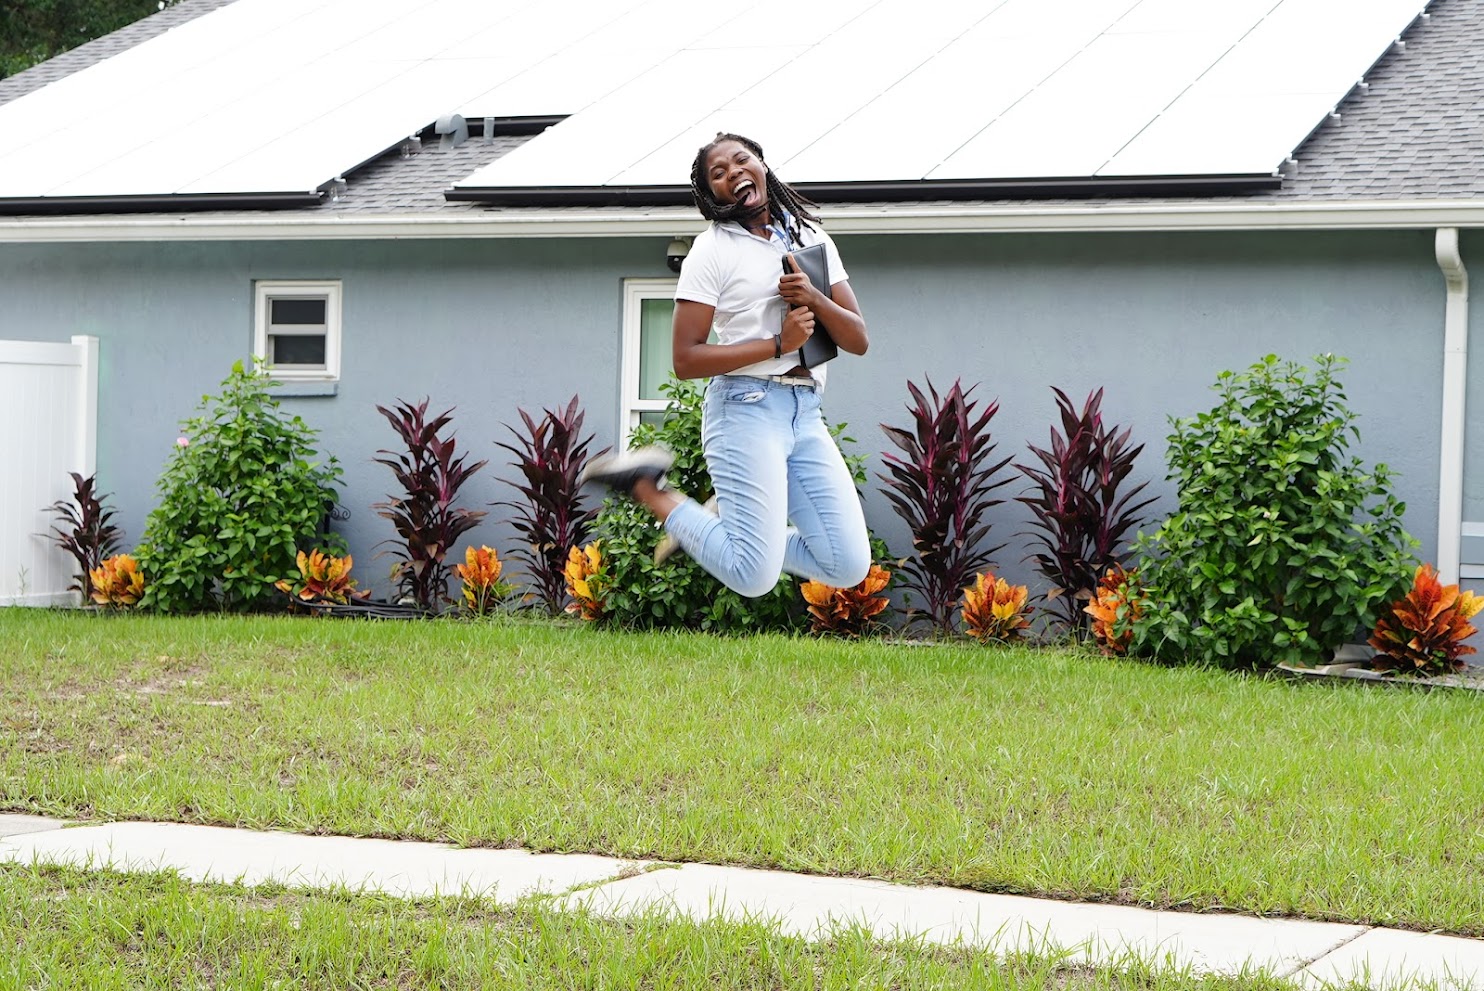 An image of a Zone 5 Representative jumping and smiling in front of a new solar installation. Is solar a scam?